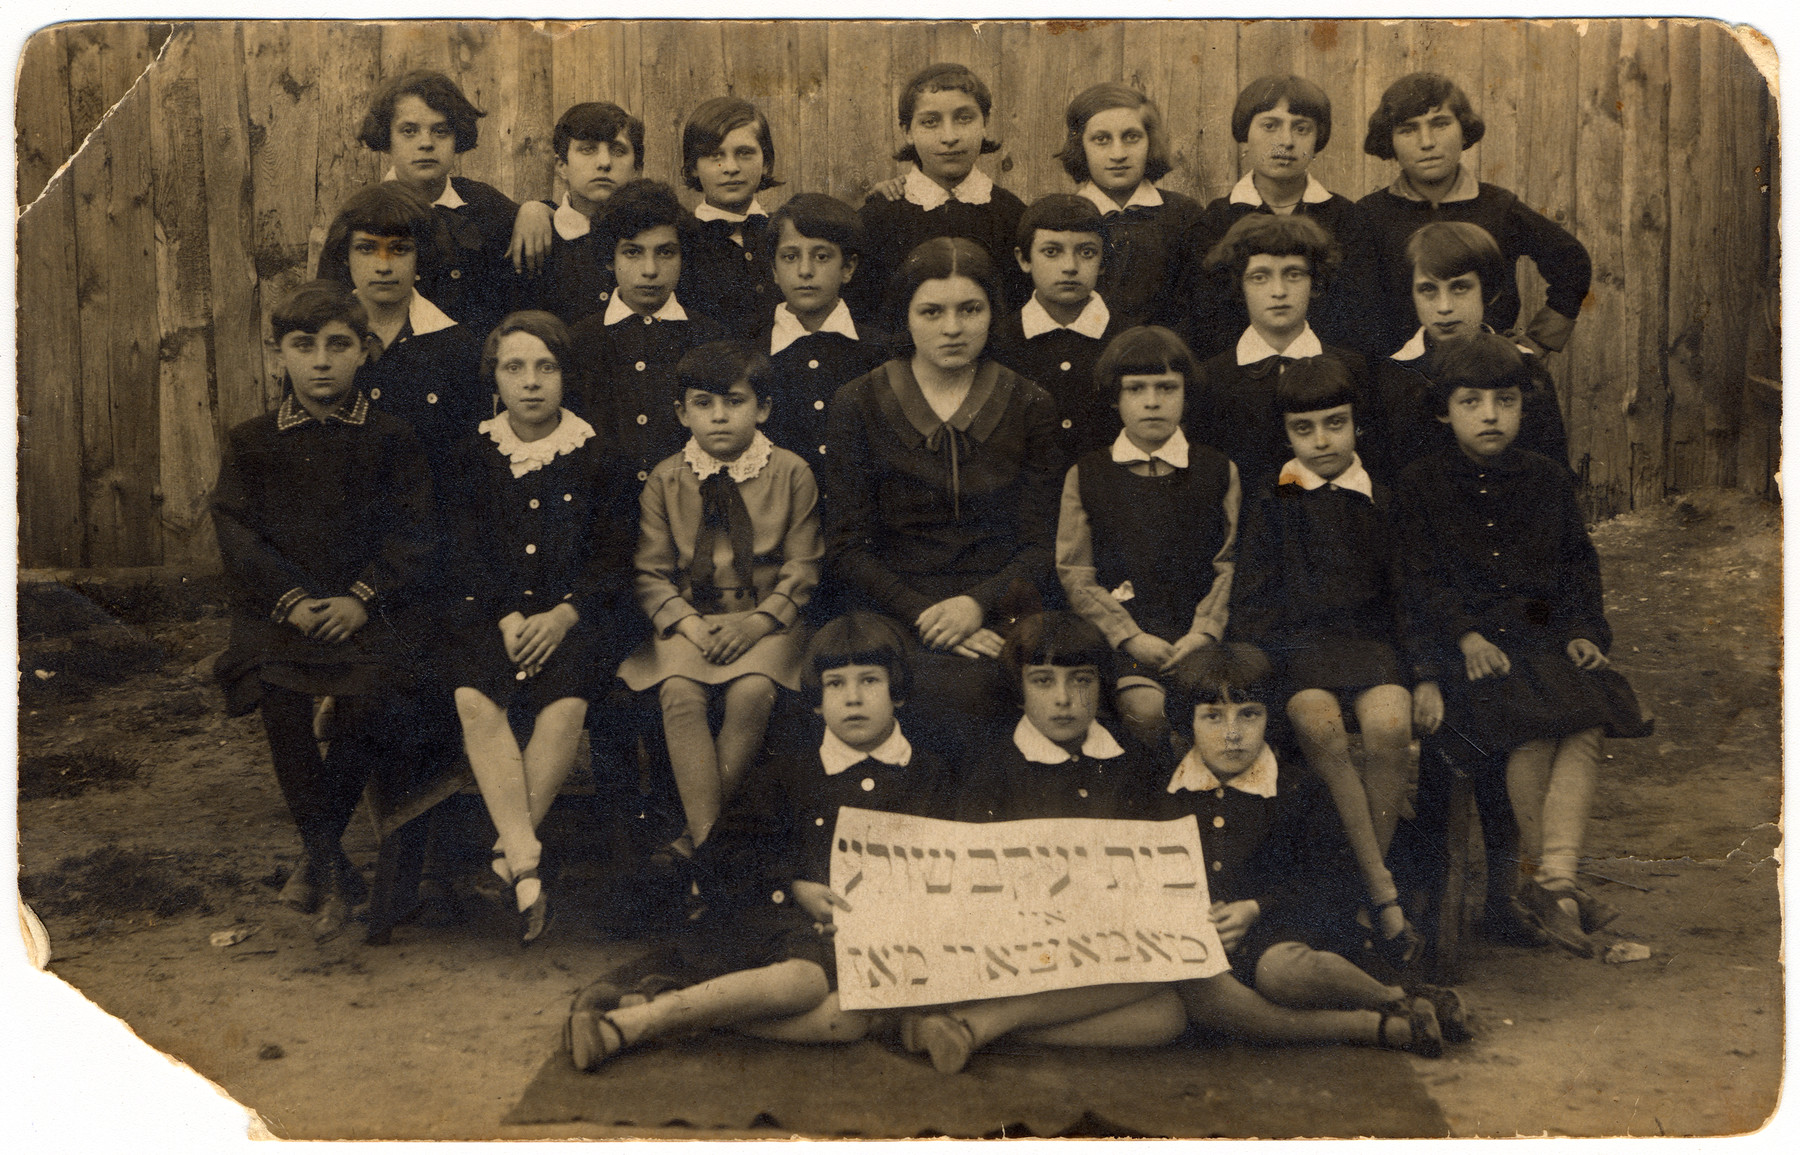 Class portrait of a Beit Yaakov, religious girls school in Tomaszow Mazowiecki.

Roza Grynspan is pictured in the top row, second from the right.